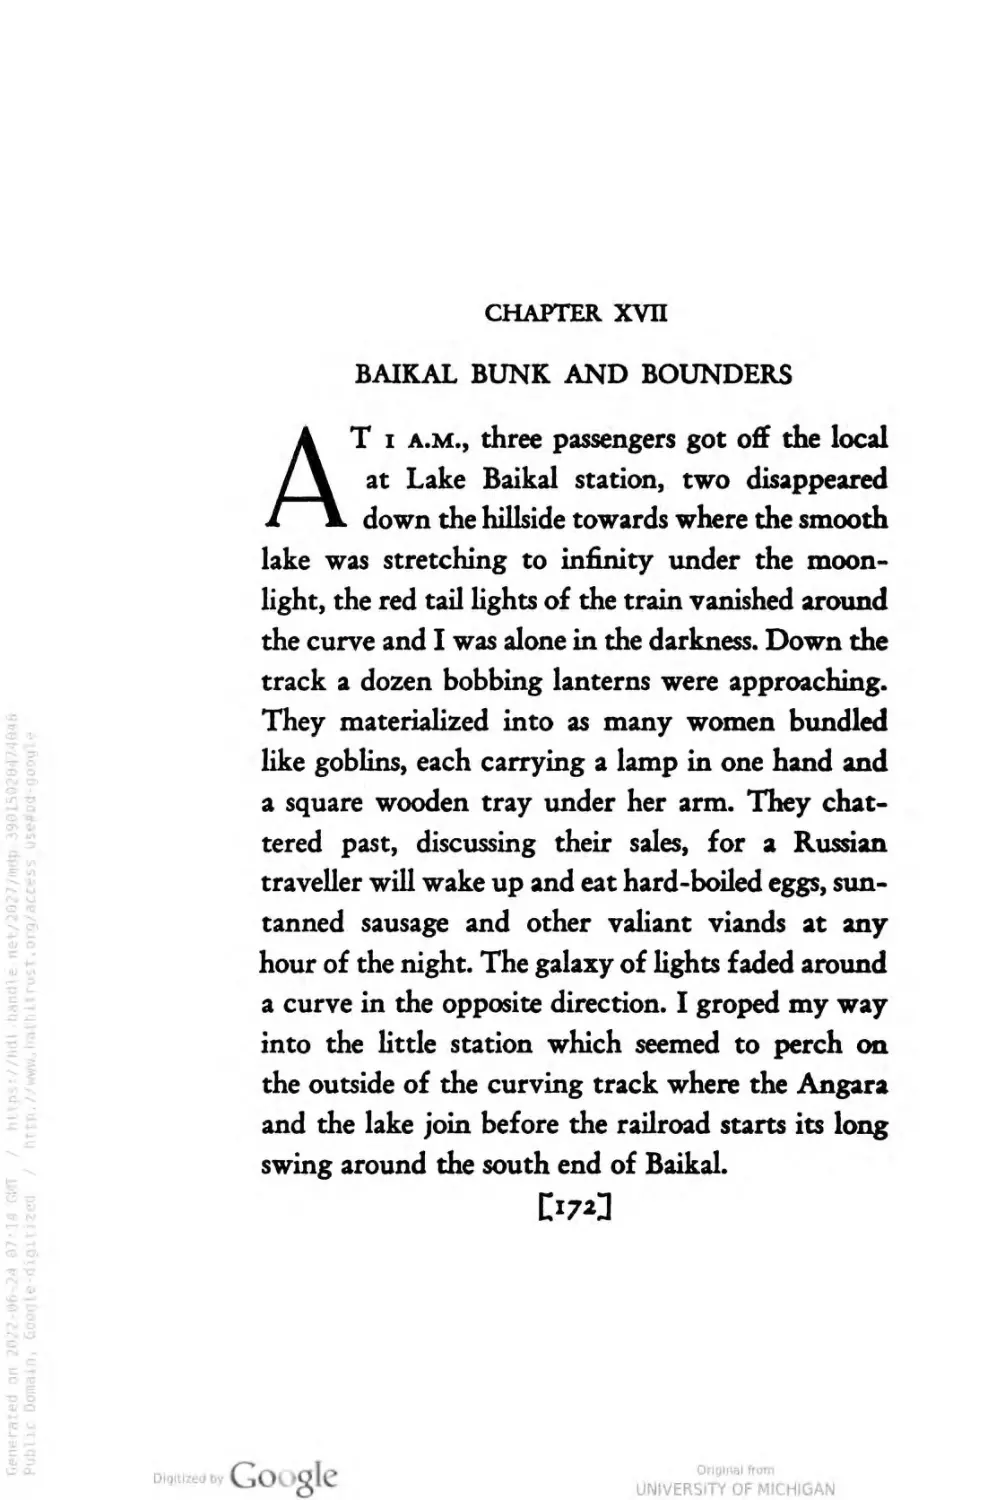 CHAPTER XVII. BAIKAL BUNK AND BOUNDERS